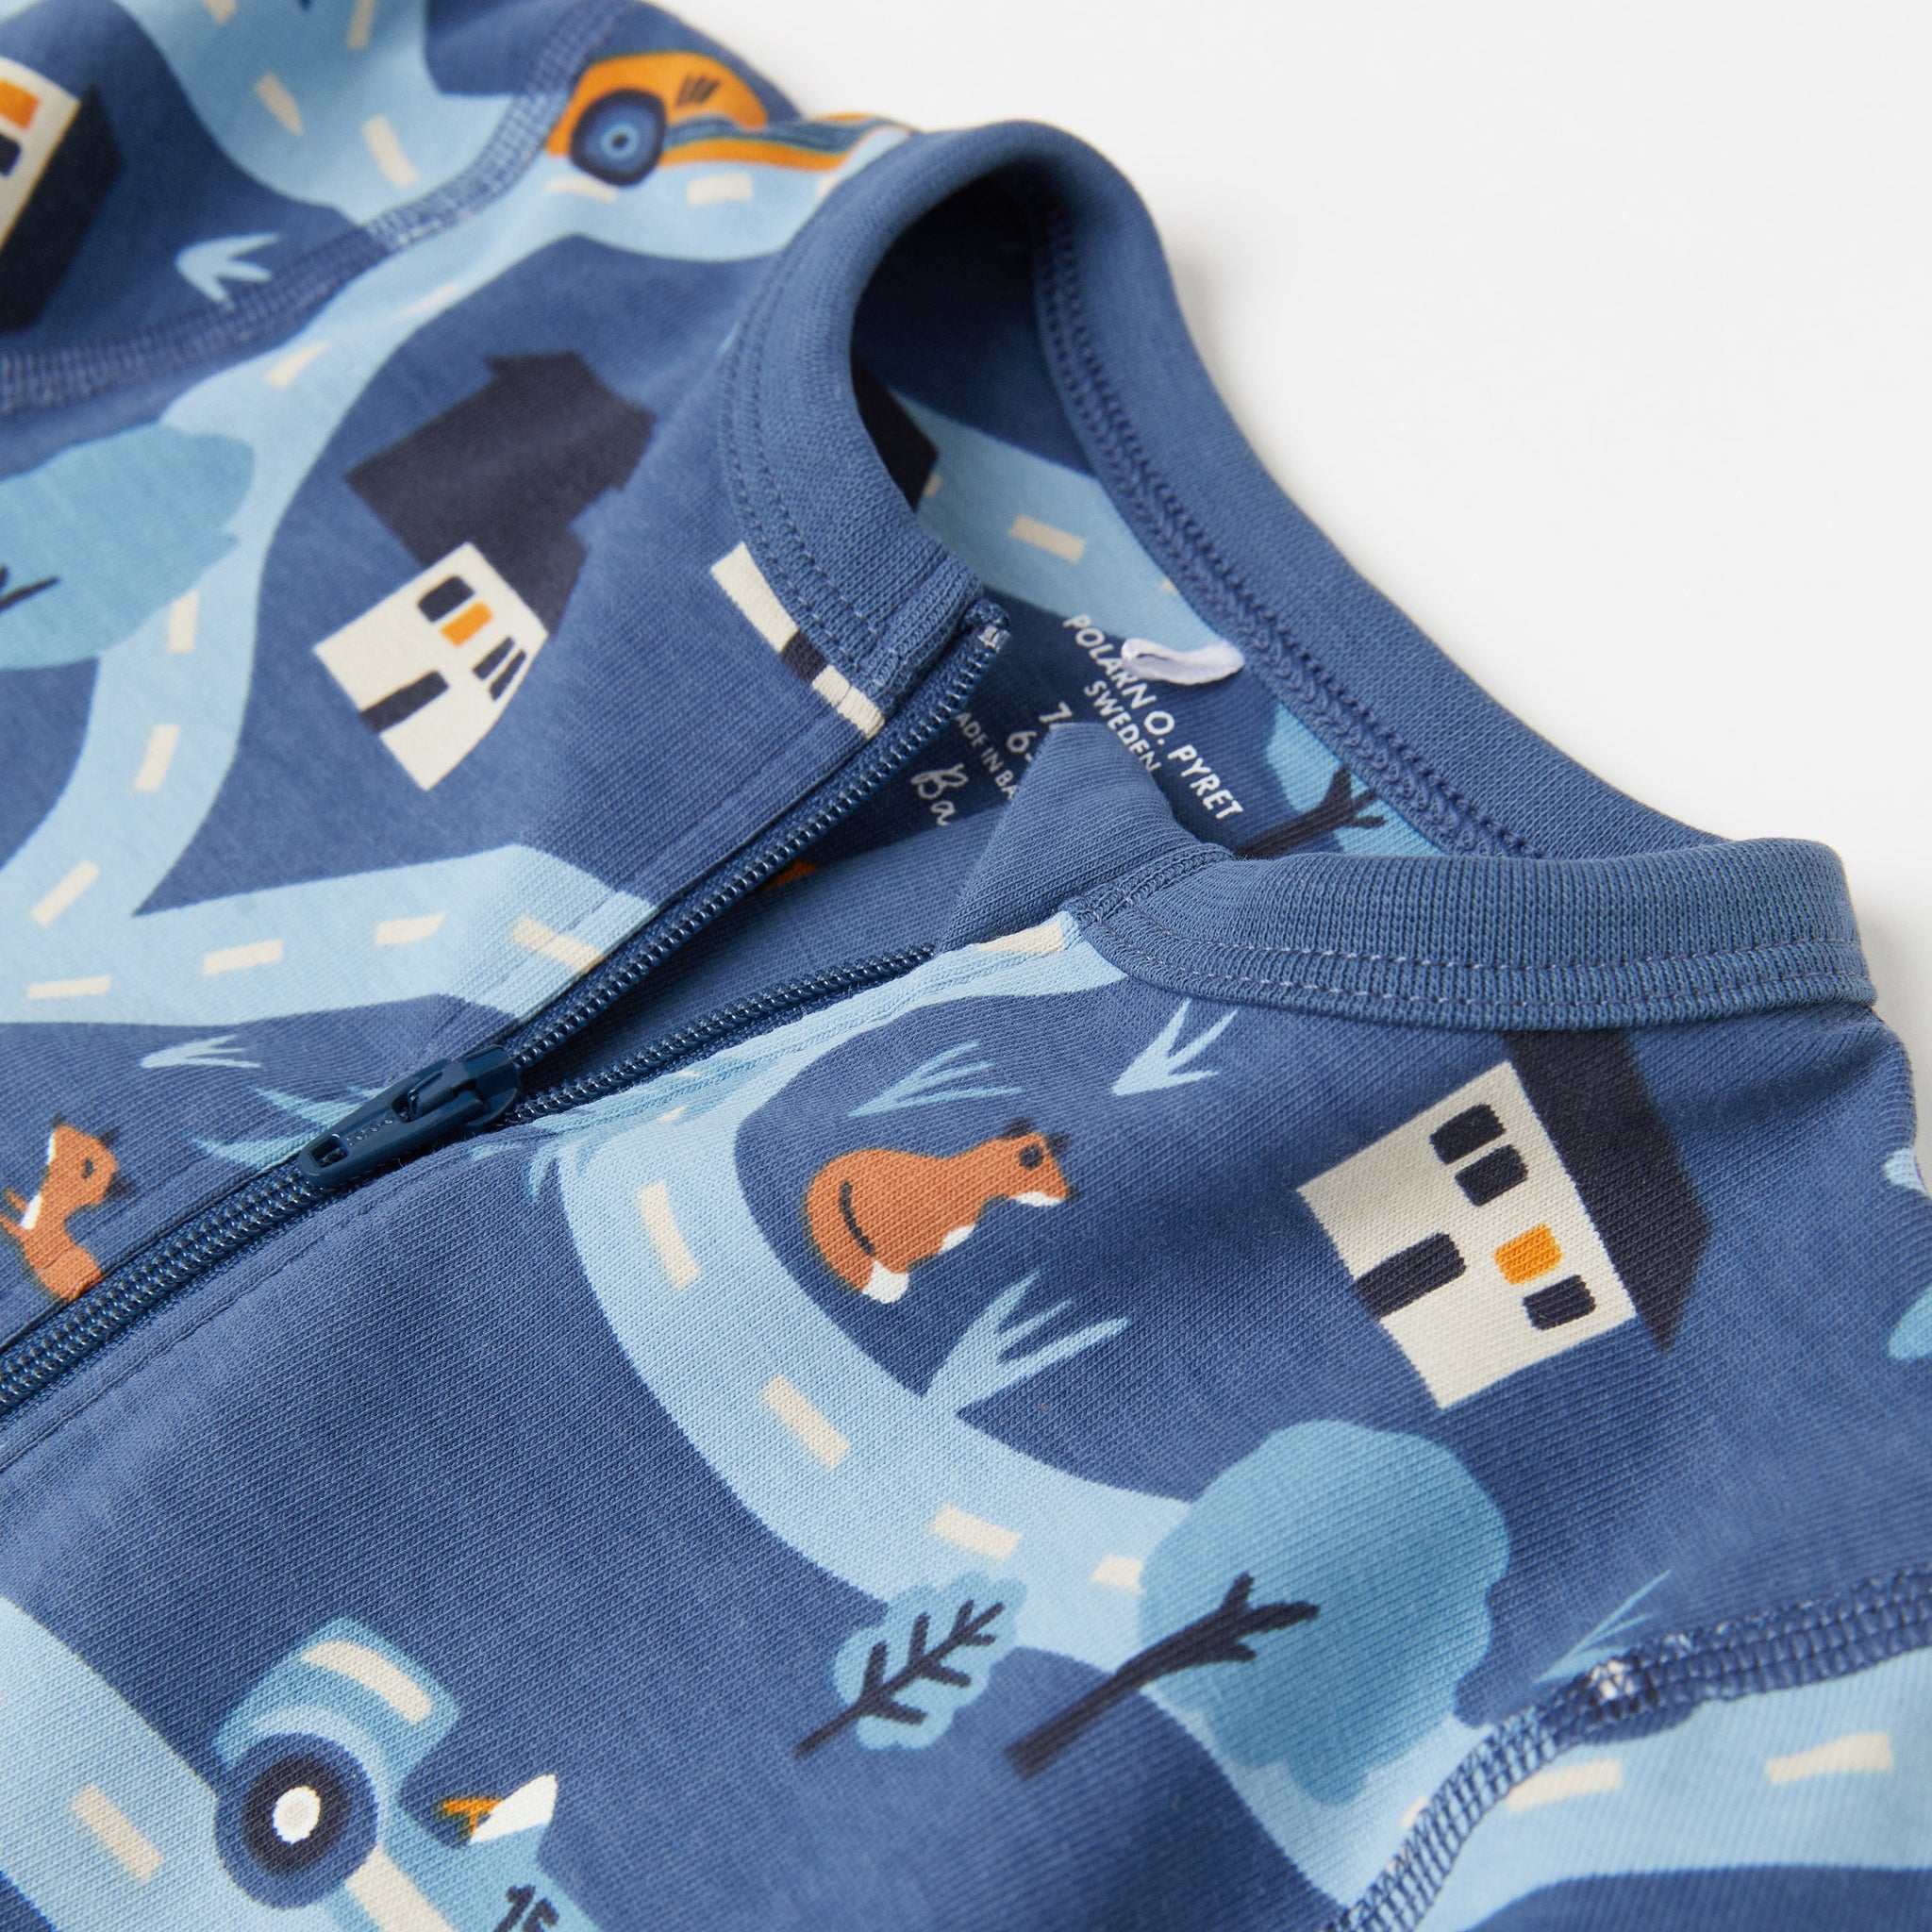 Car Print Blue Baby All-In-One from the Polarn O. Pyret Kidswear collection. The best ethical kids clothes